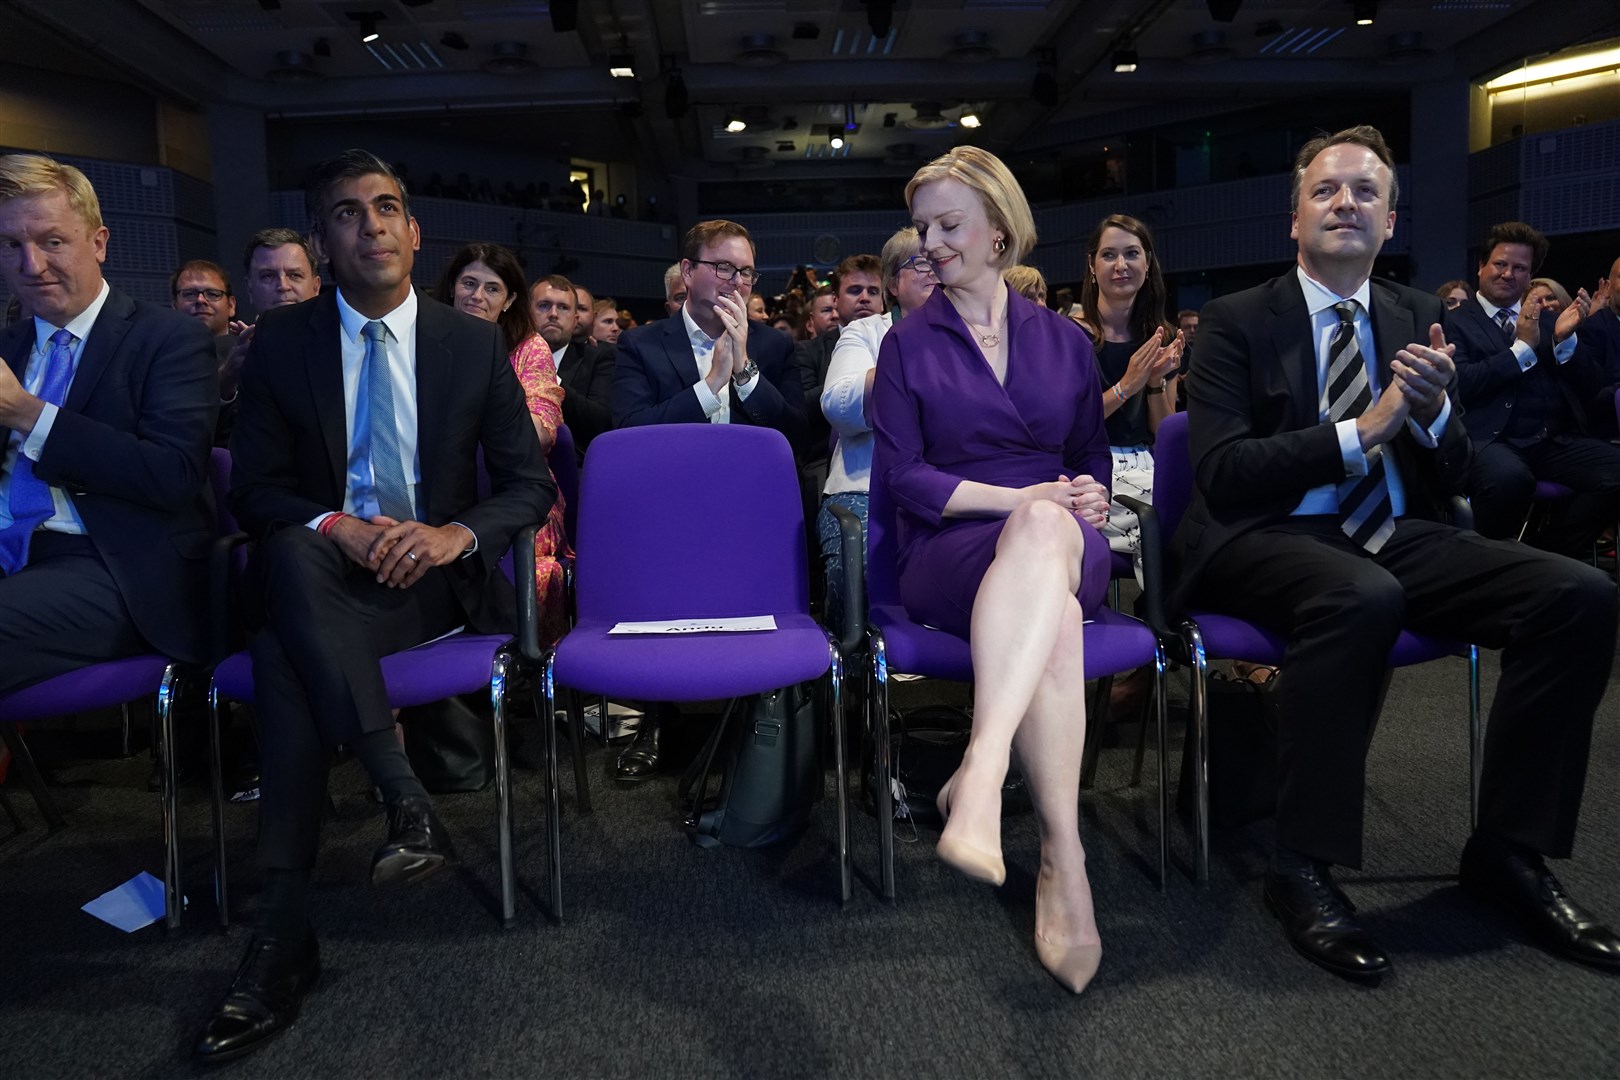 Rishi Sunak, Liz Truss and her husband Hugh O’Leary at the Queen Elizabeth II Centre in London ahead of the announcement that Ms Truss is the new Conservative Party leader and will become the next prime minister (Stefan Rousseau/PA)